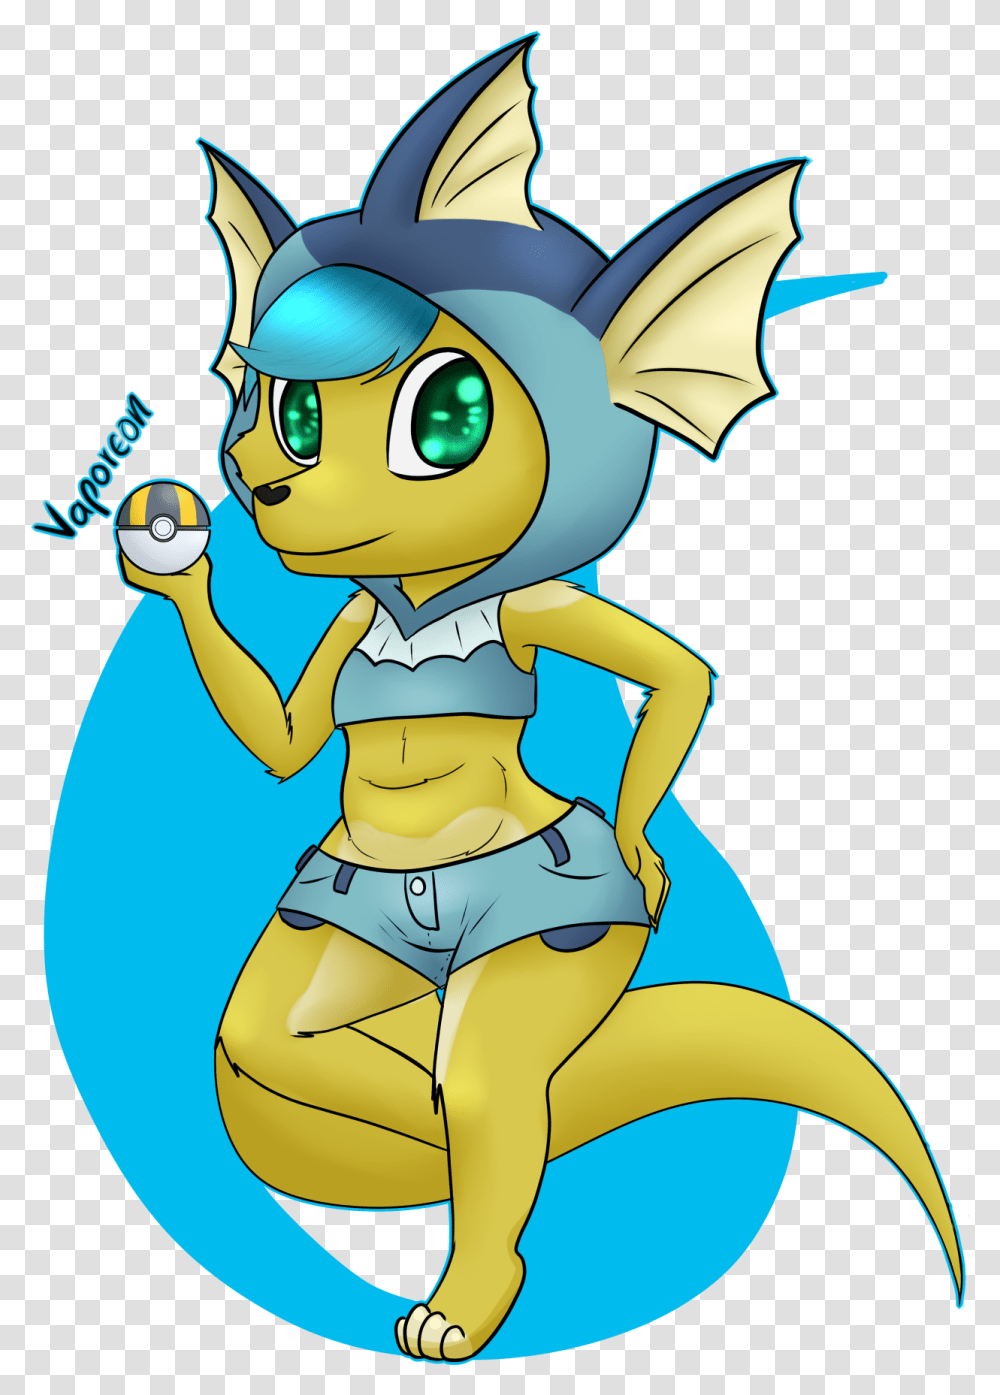 C Ethan The Vaporeon Cartoon, Goggles, Accessories, Costume Transparent Png